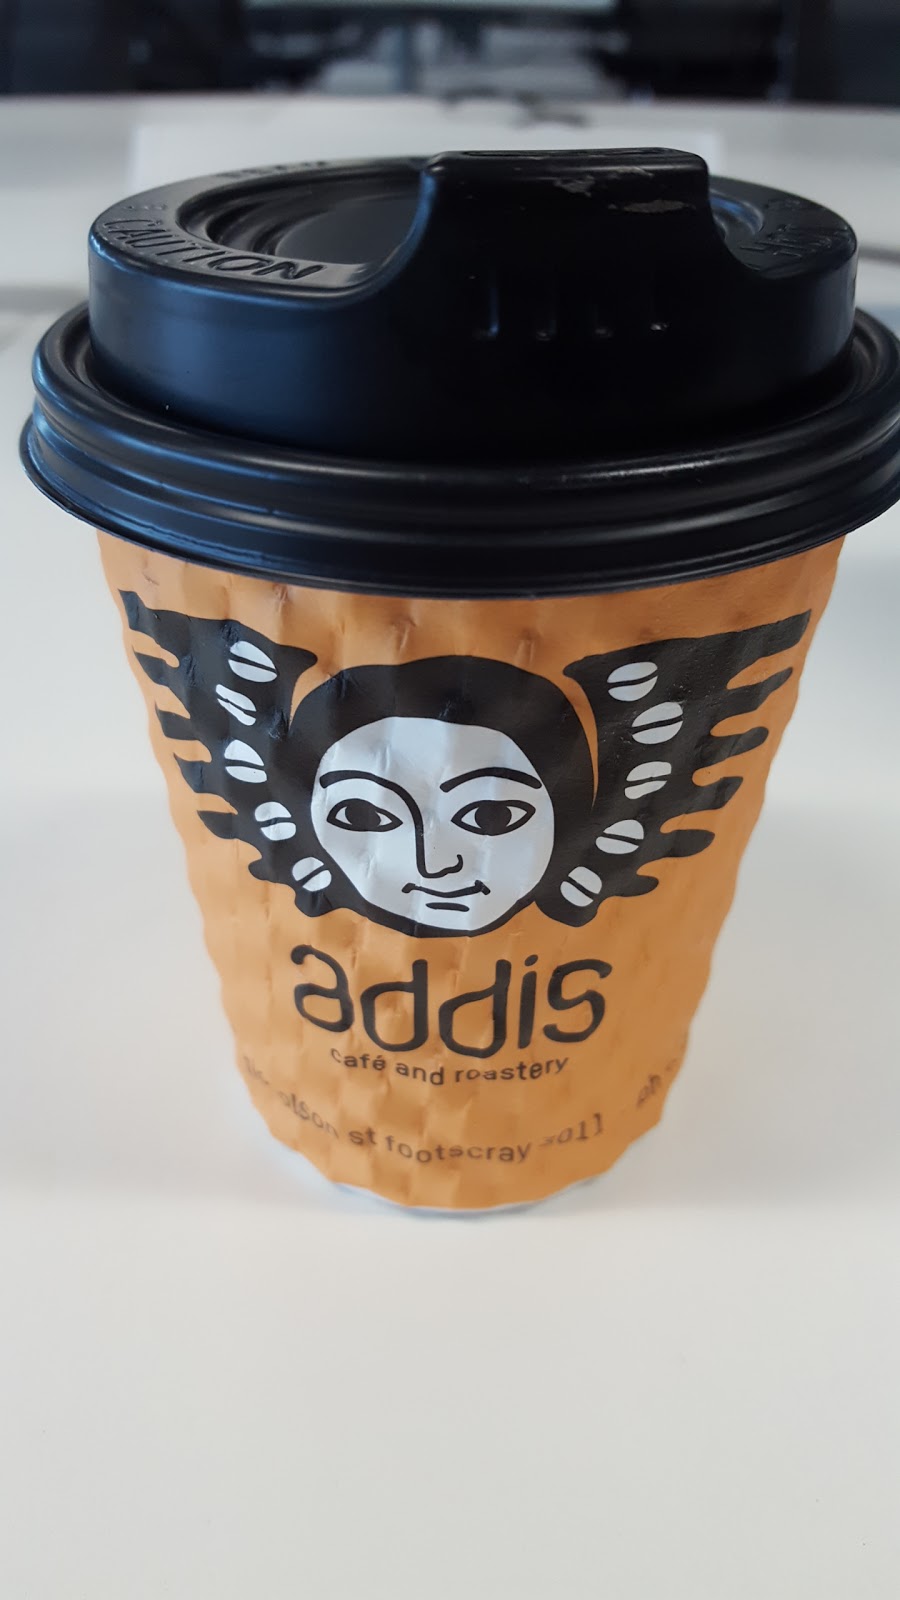 Addis Cafe and Roastery | cafe | 226 Nicholson St, Footscray VIC 3011, Australia | 0391913291 OR +61 3 9191 3291